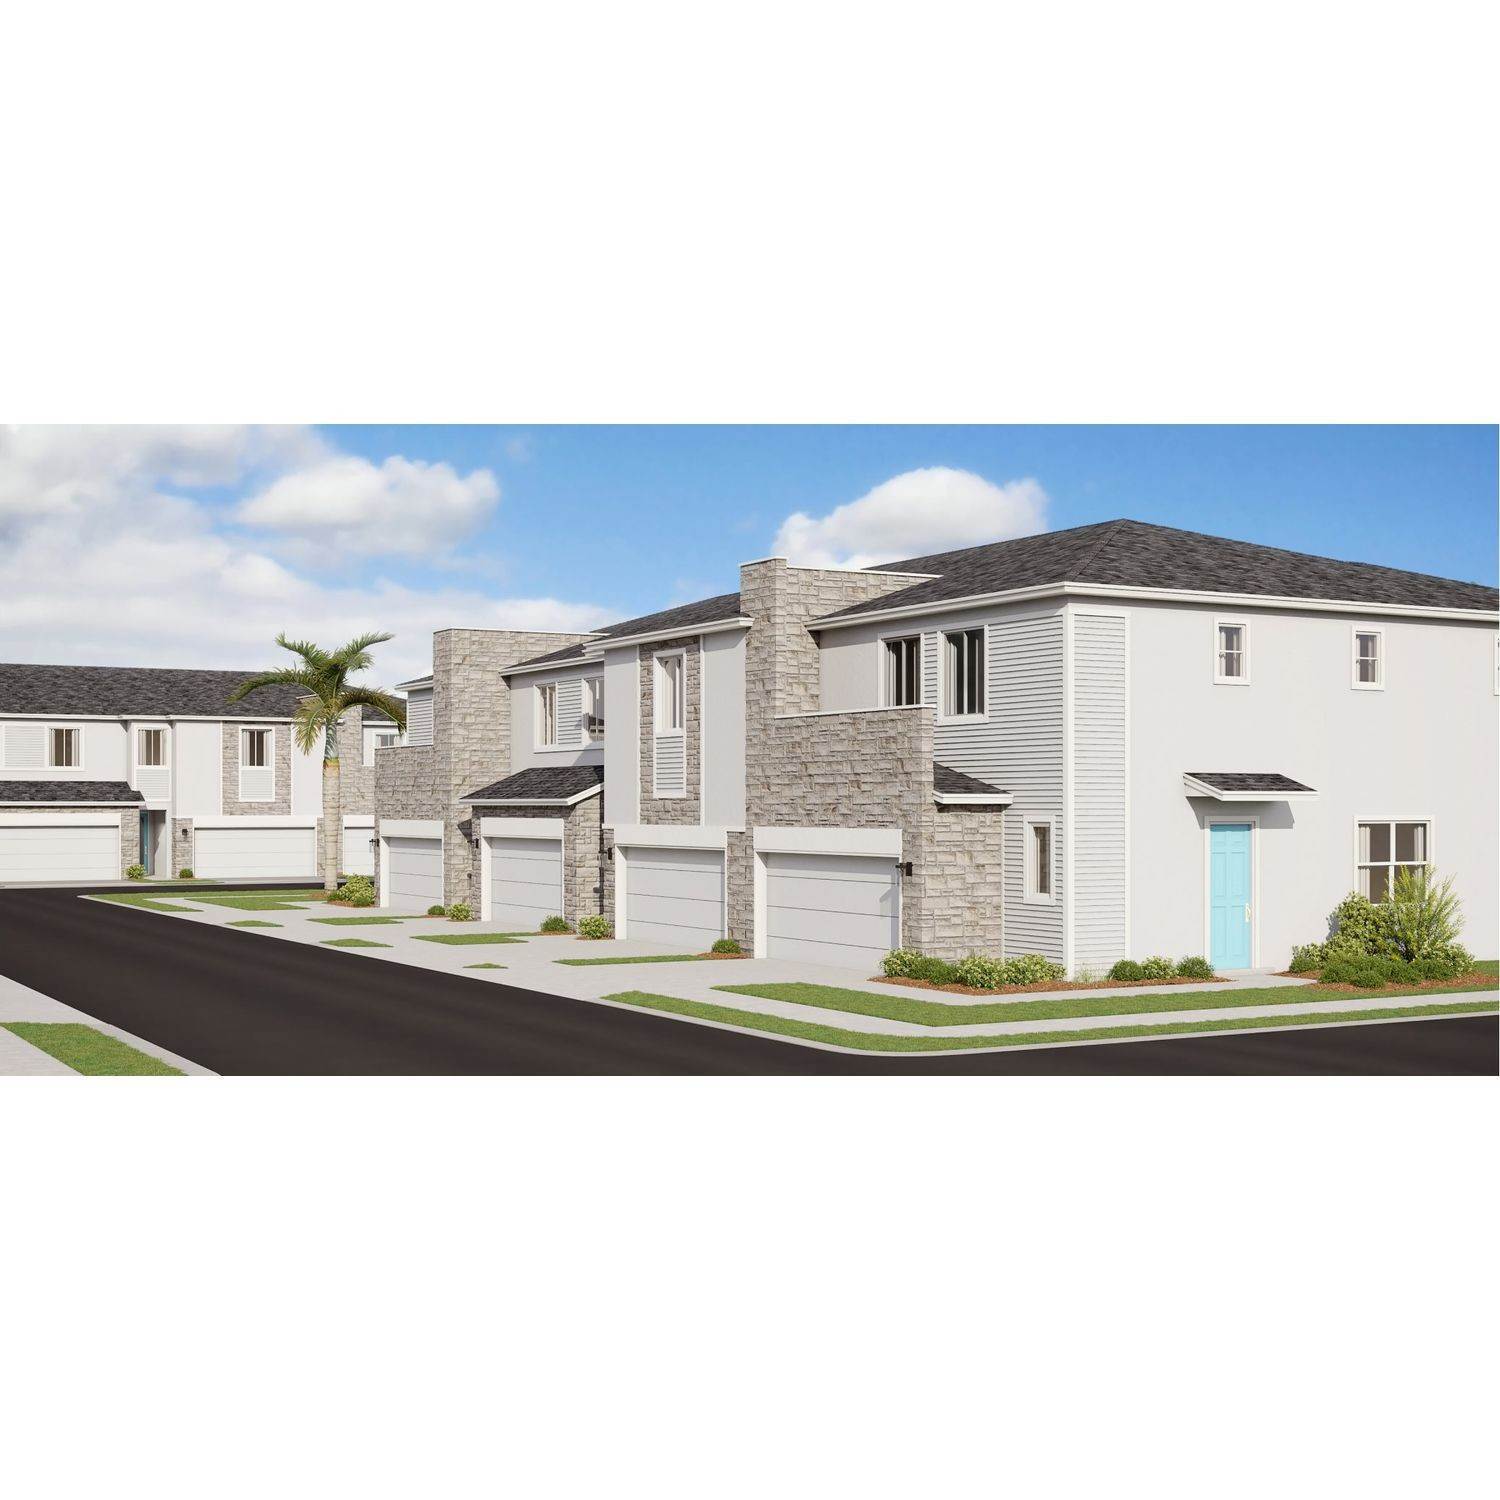 2. Champions Pointe - Champions Pointe Townhomes II building at 224 Nine Iron Drive, Davenport, FL 33896